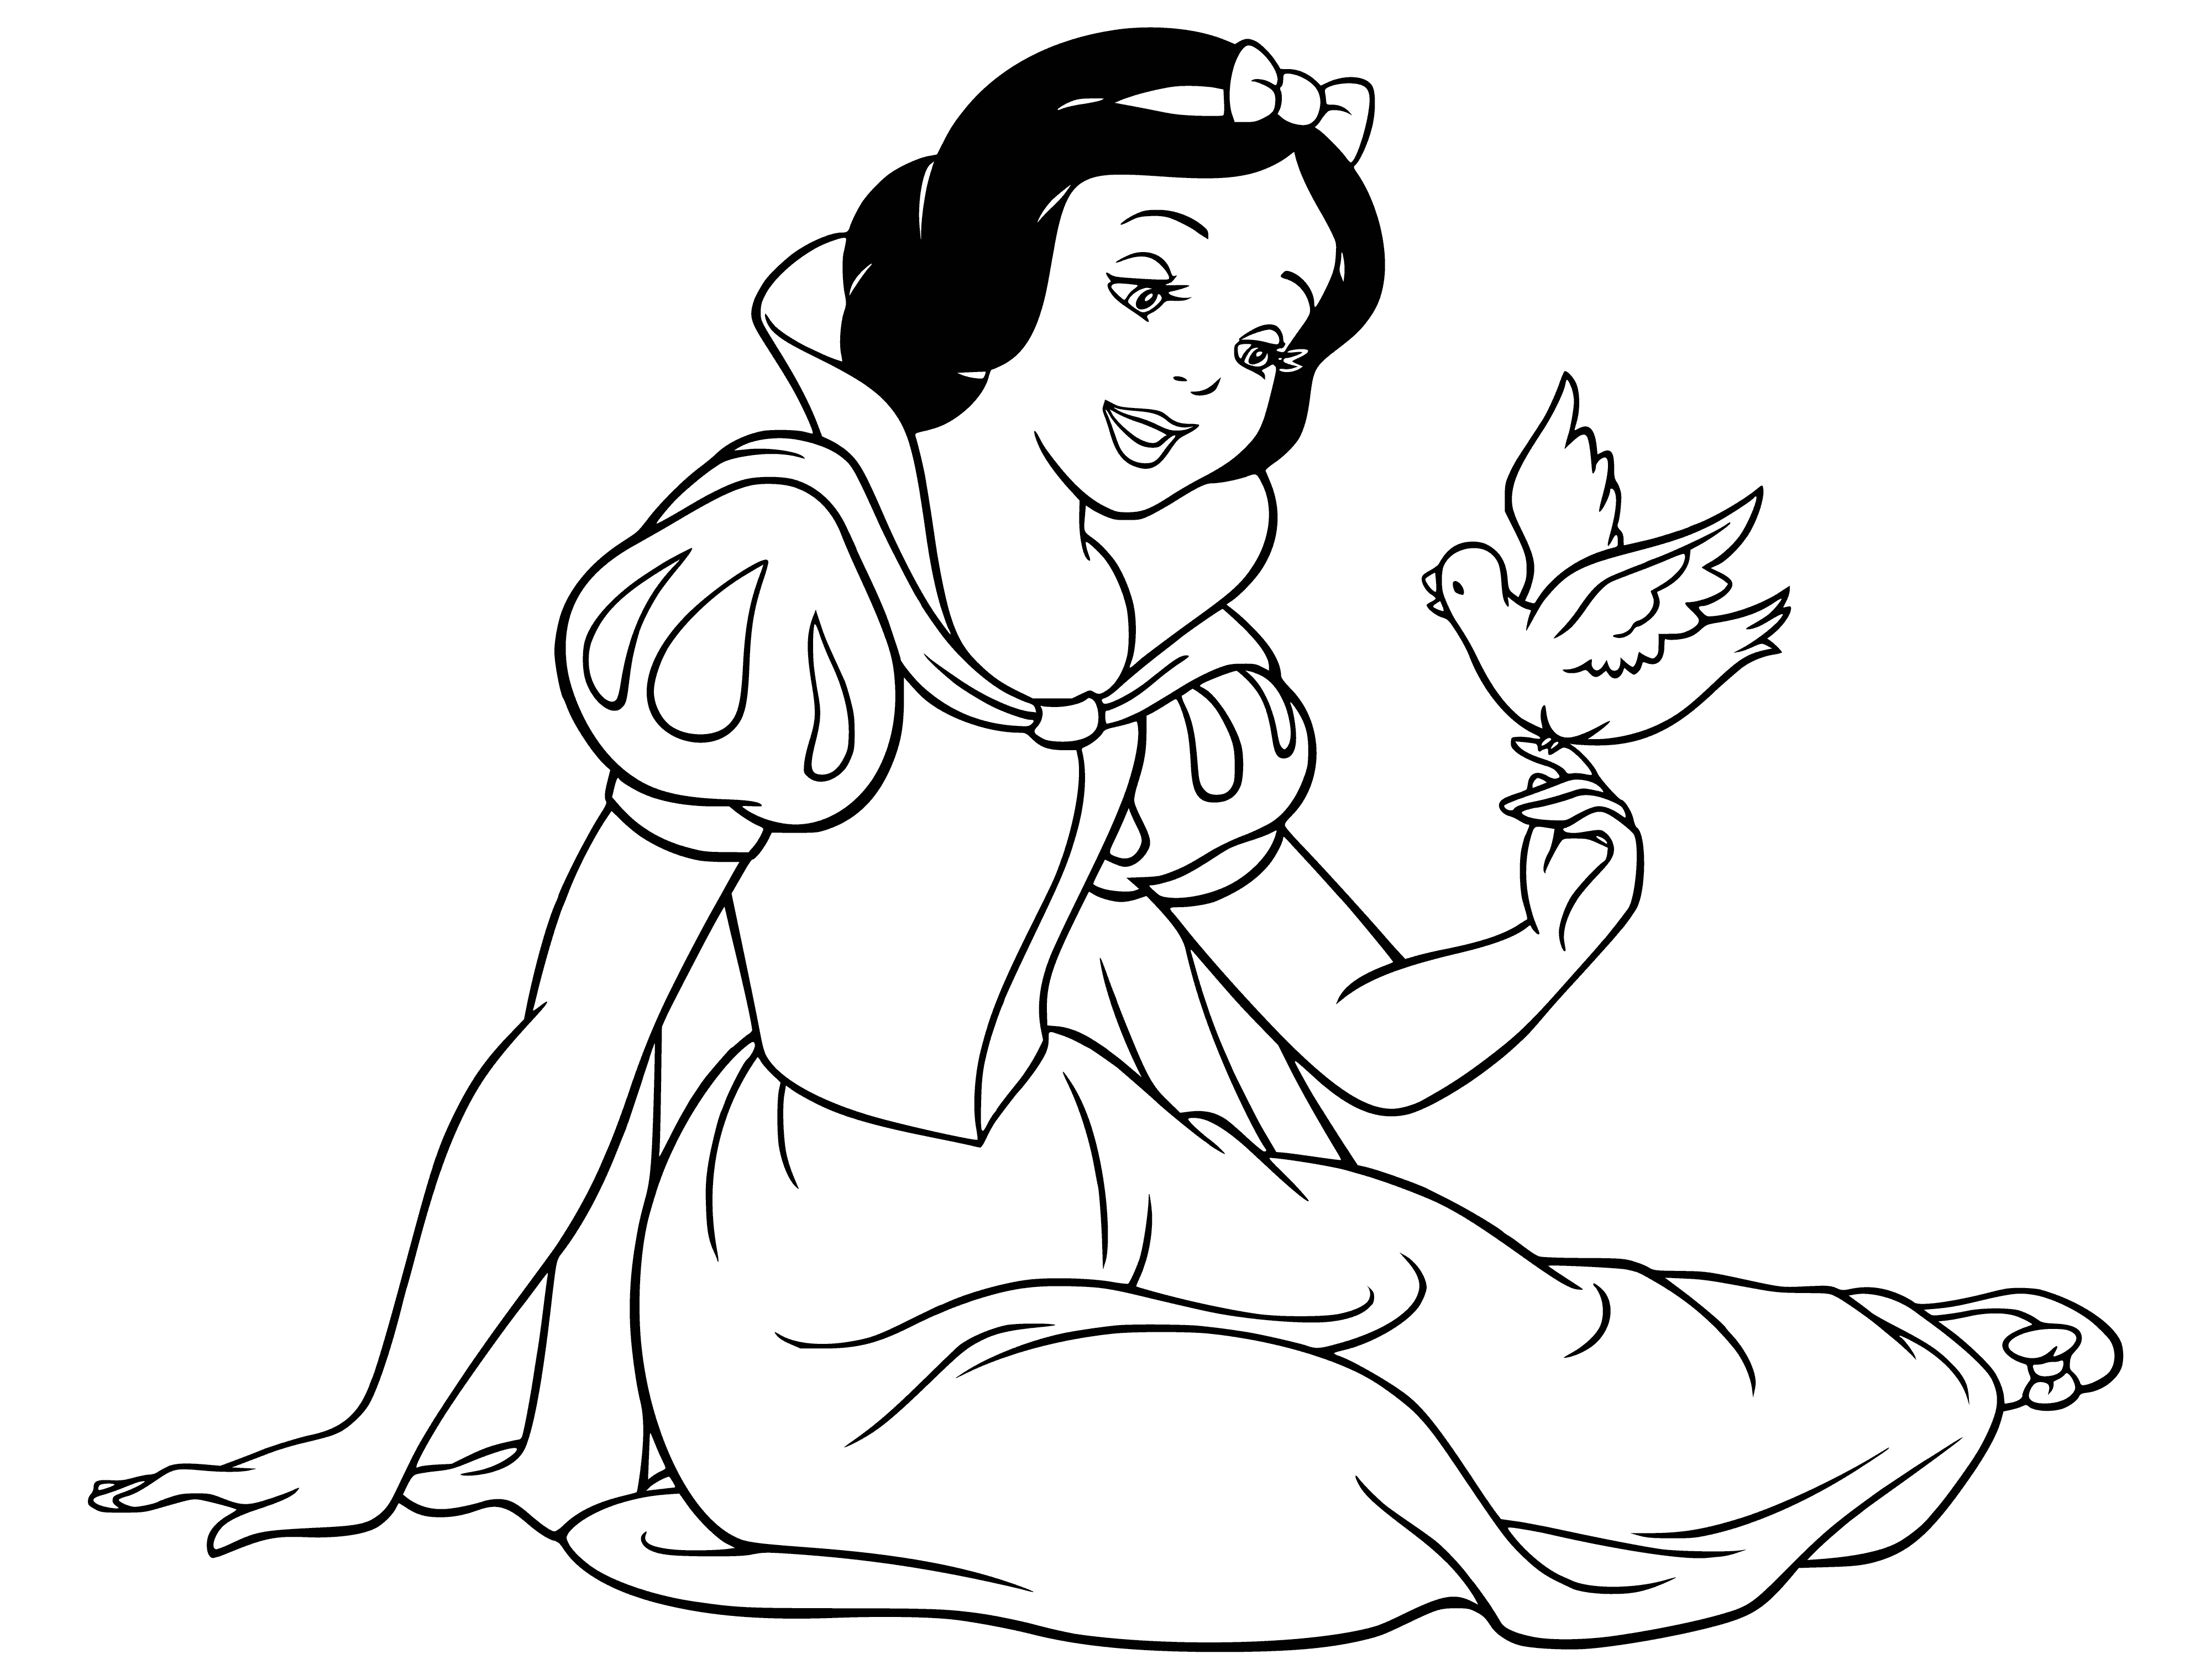 Snow White and the Bird coloring page